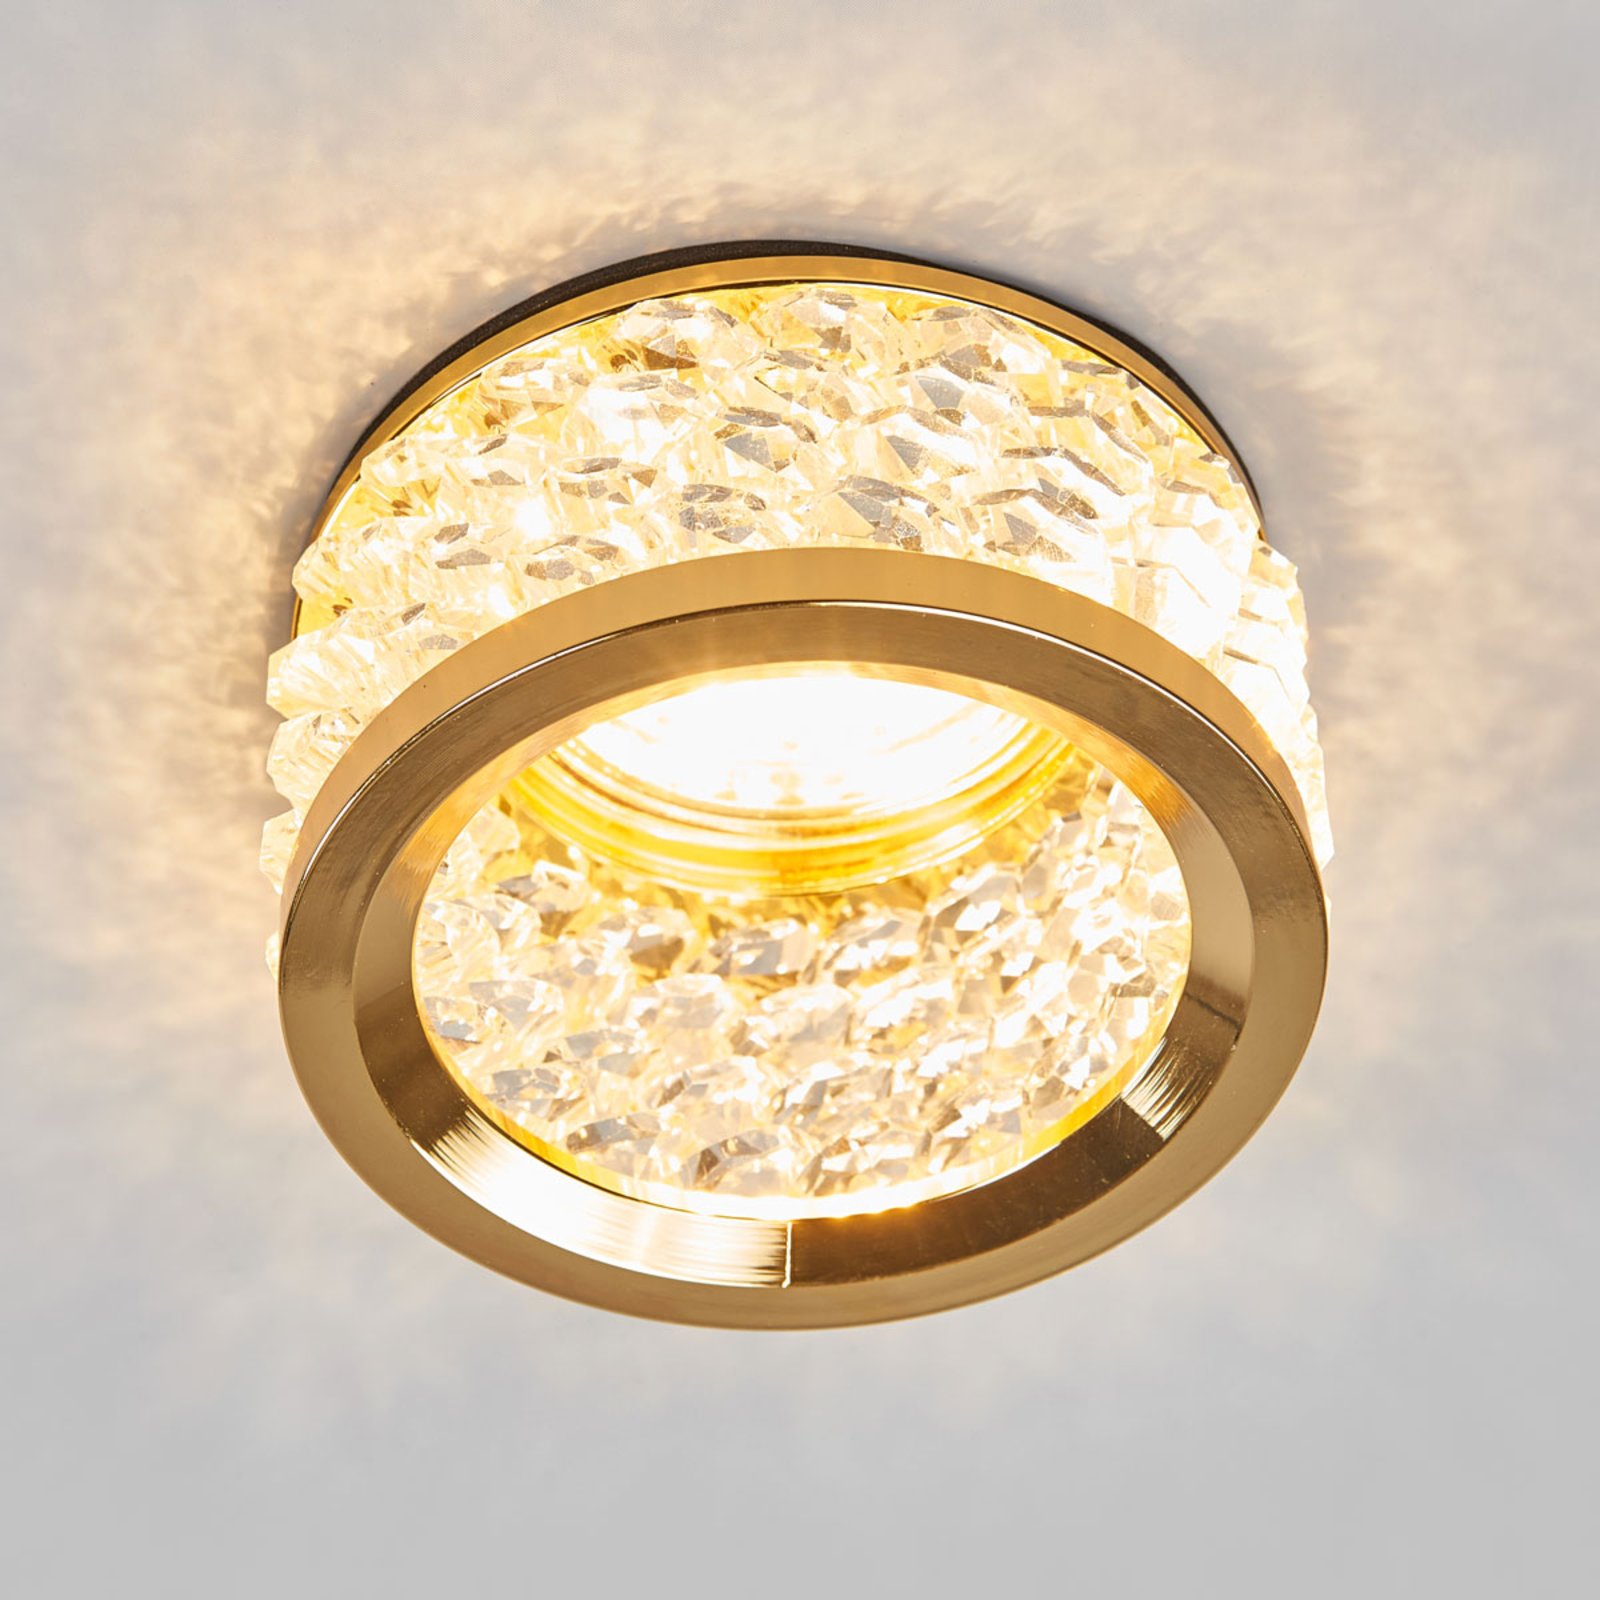 Iwen Built-In Light with Crystal Decoration Gold